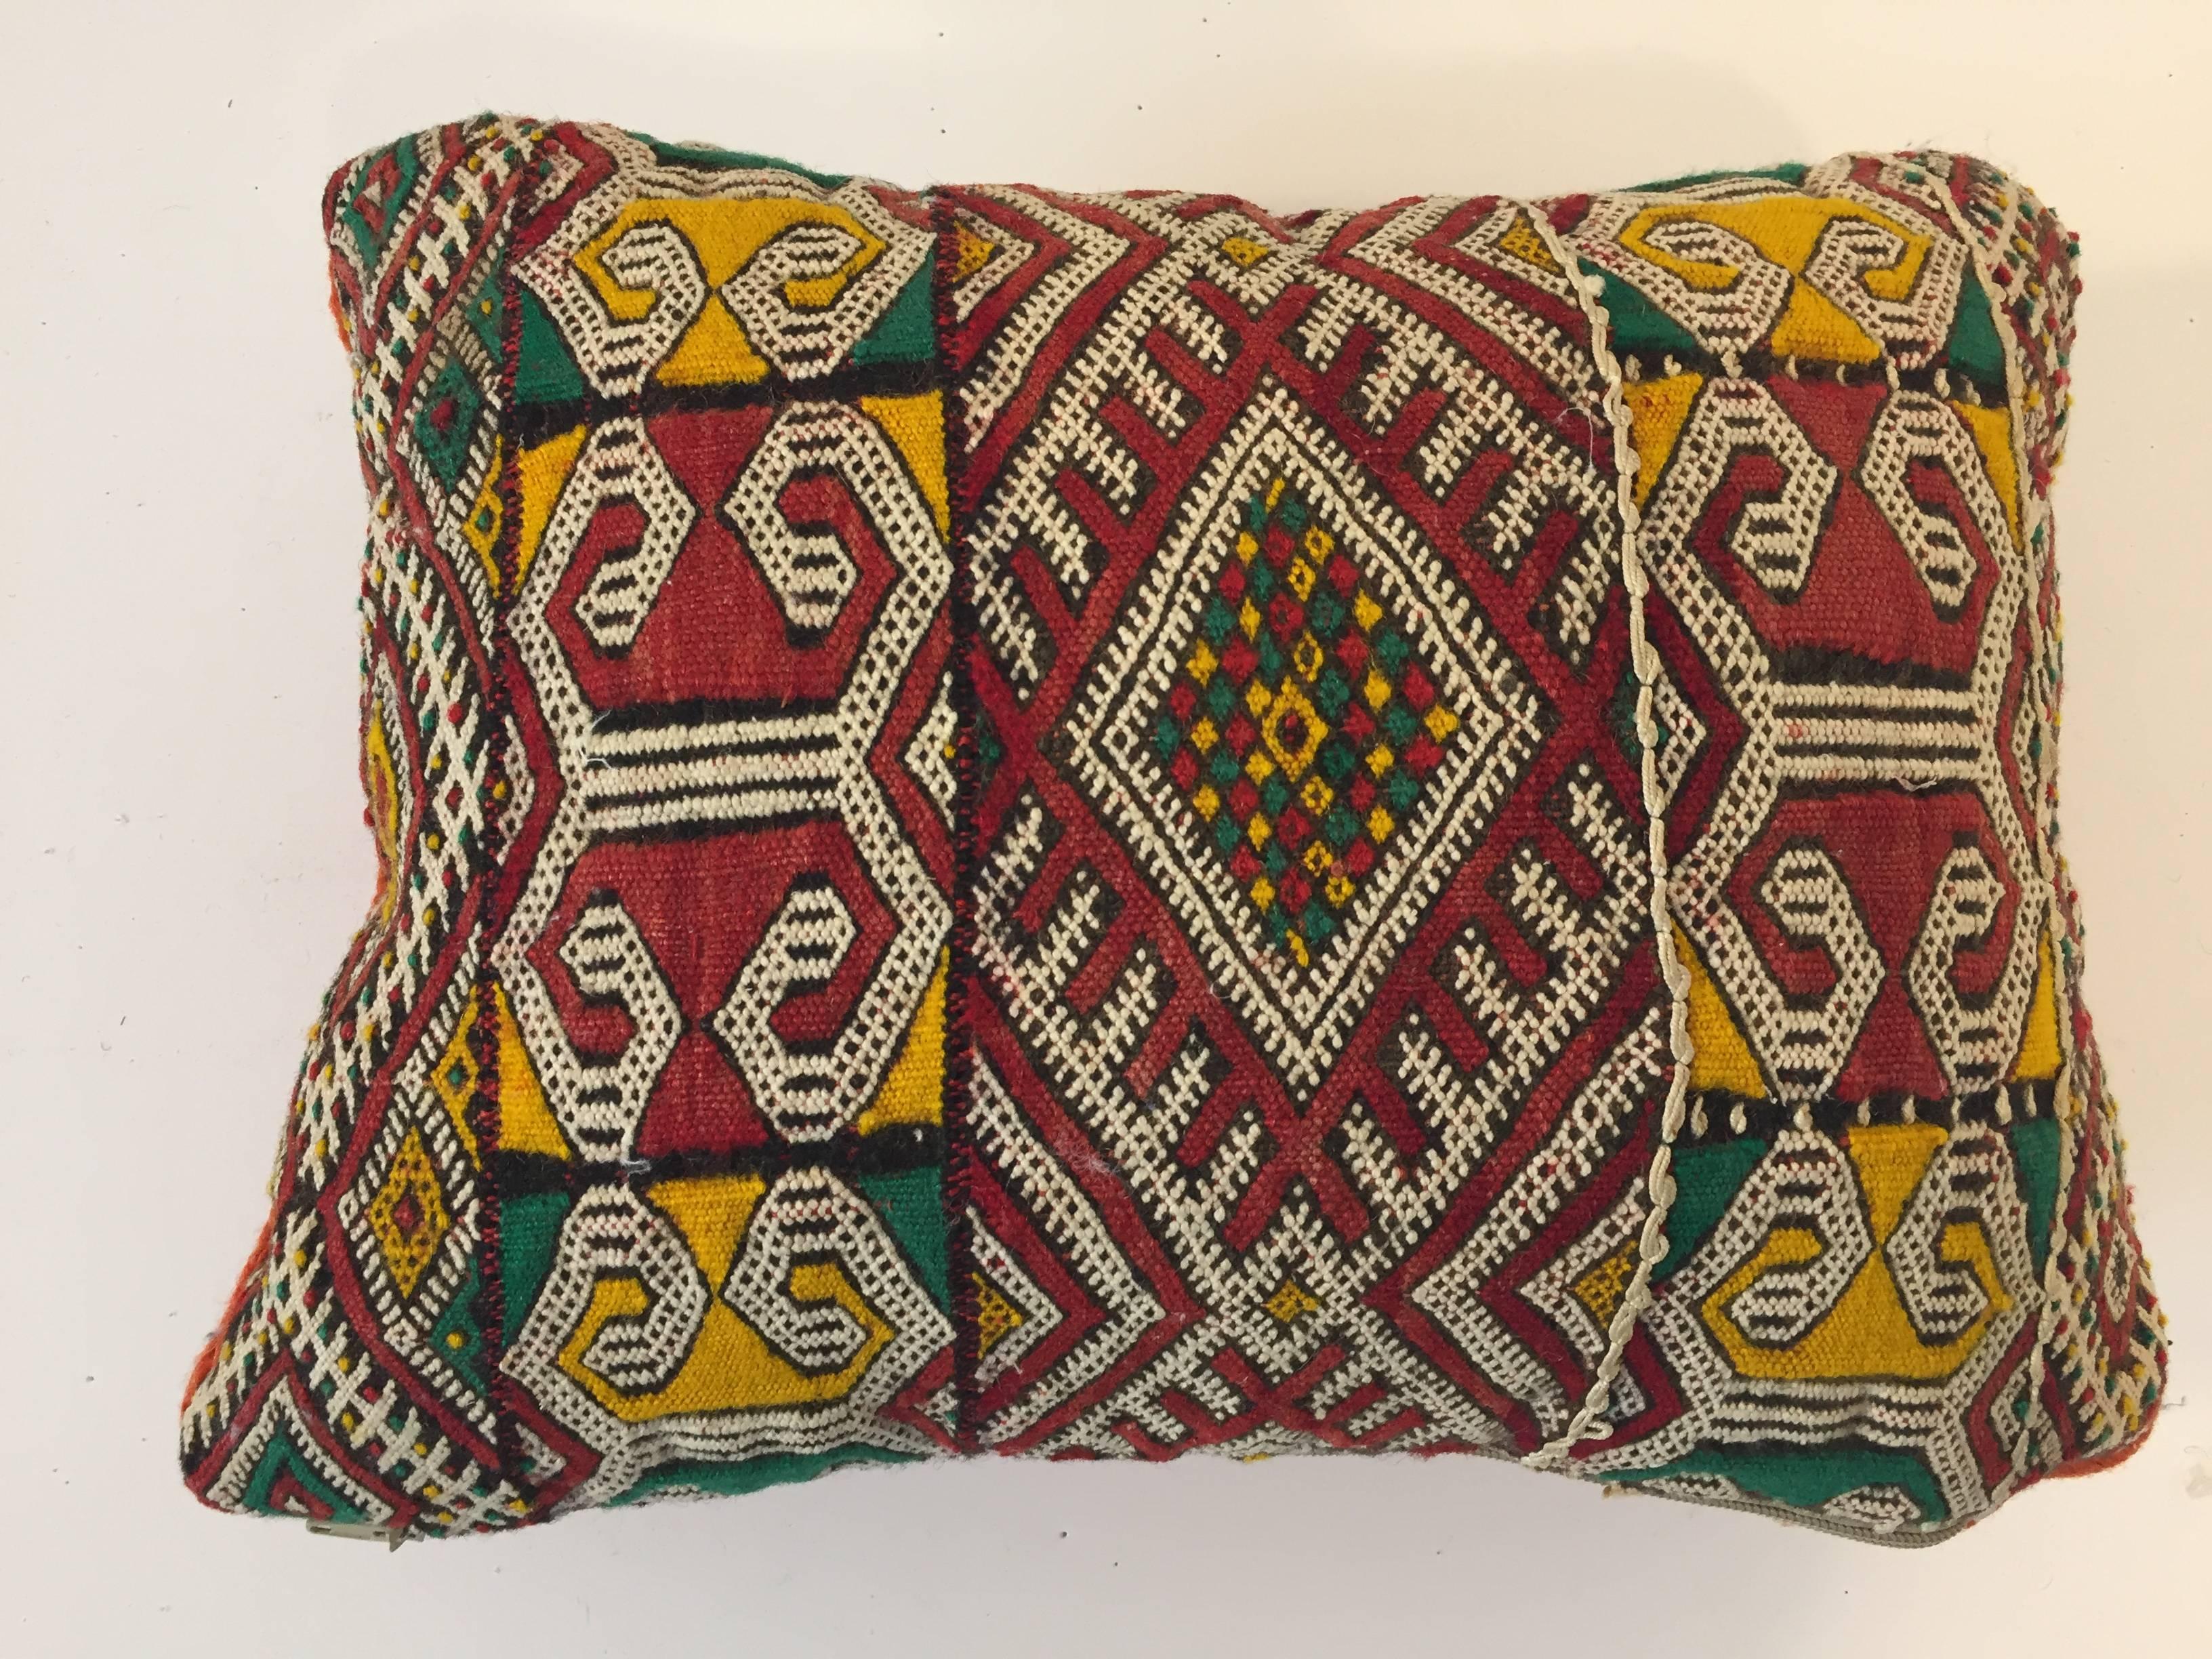 Hand-Woven Berber Tribal Moroccan Pillow with African Designs